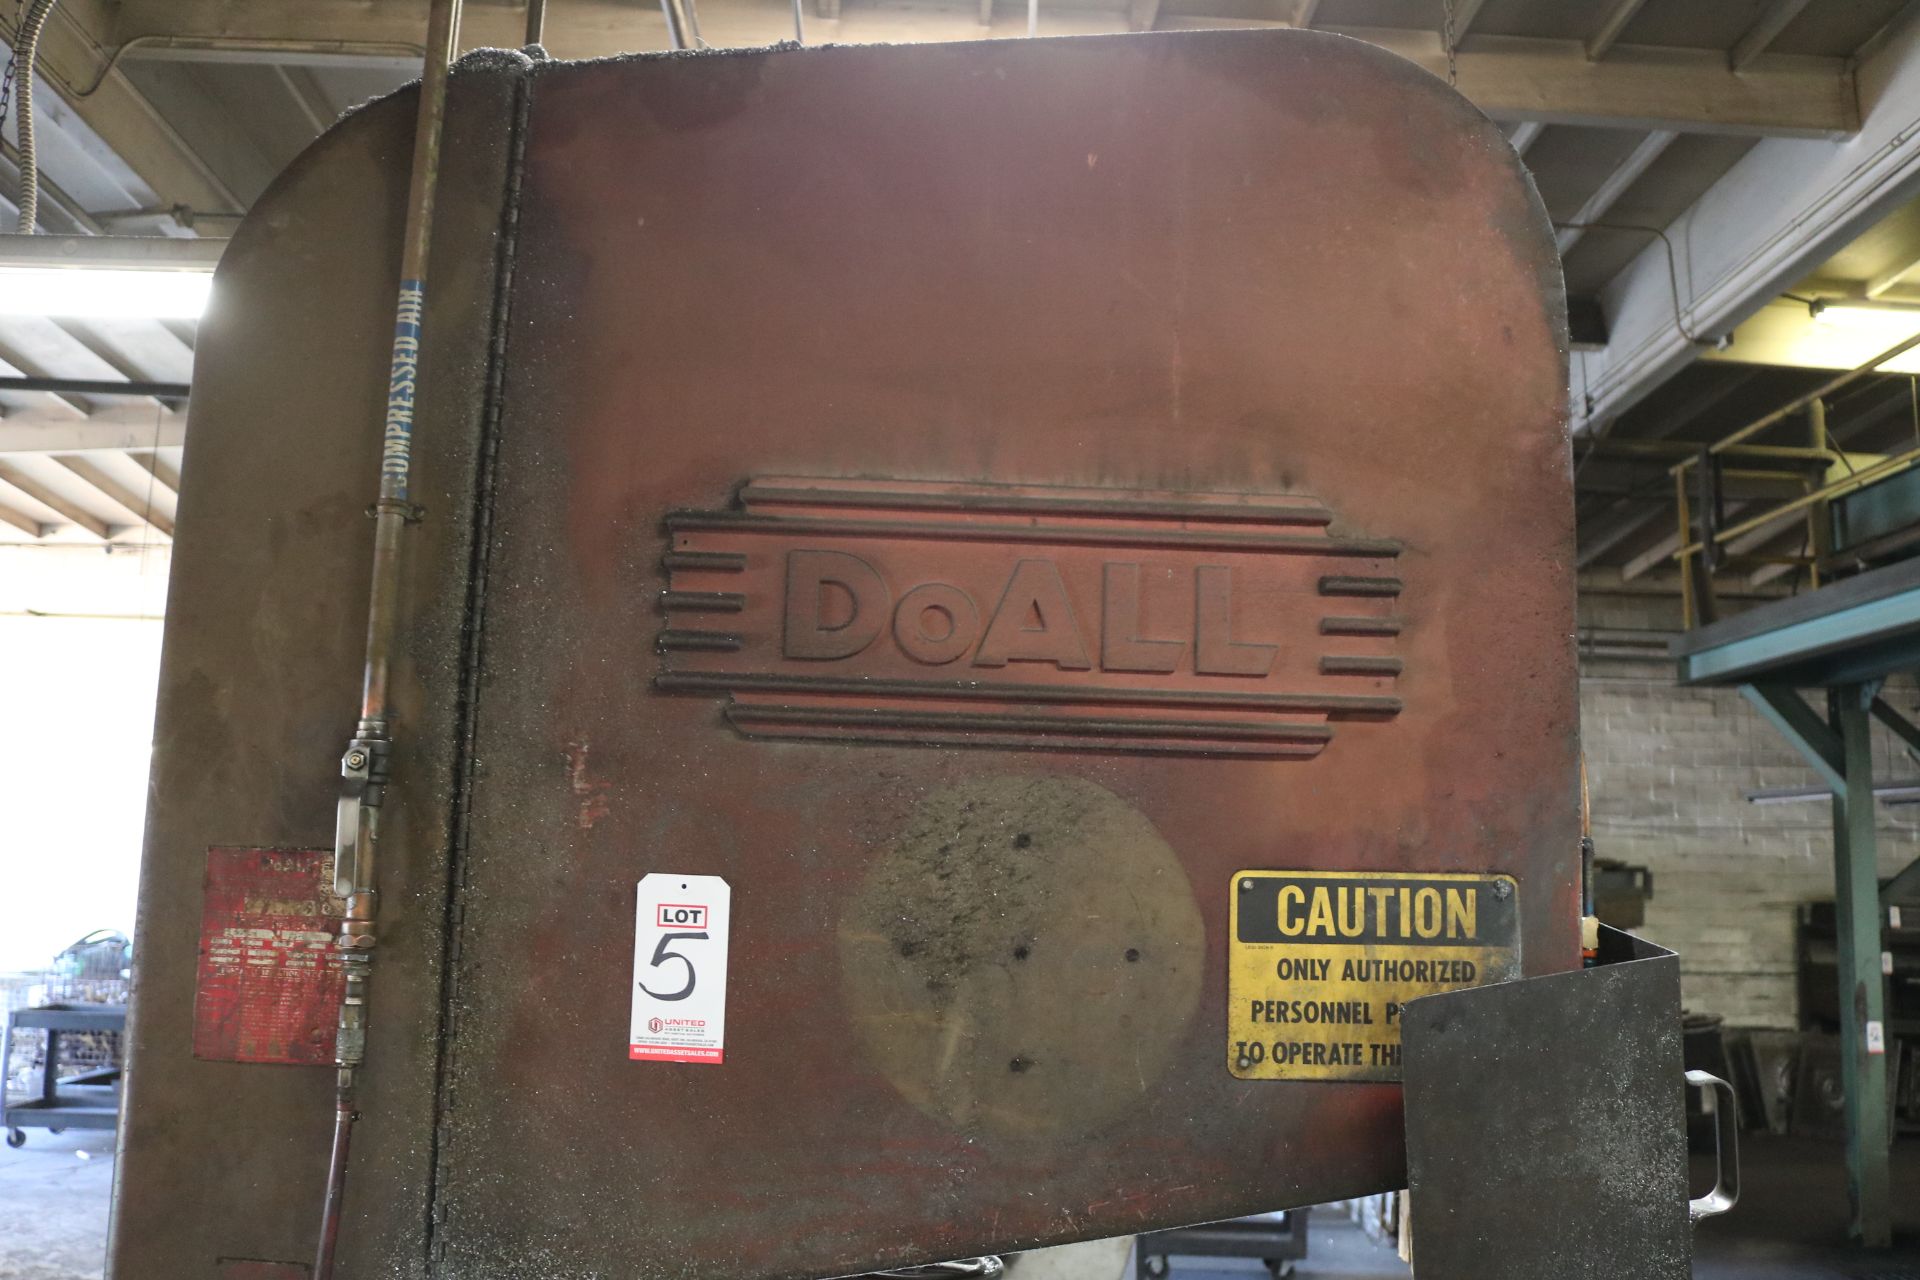 DOALL MODEL ZV-3620 36" VERTICAL BAND SAW, S/N 31-677442 - Image 2 of 3